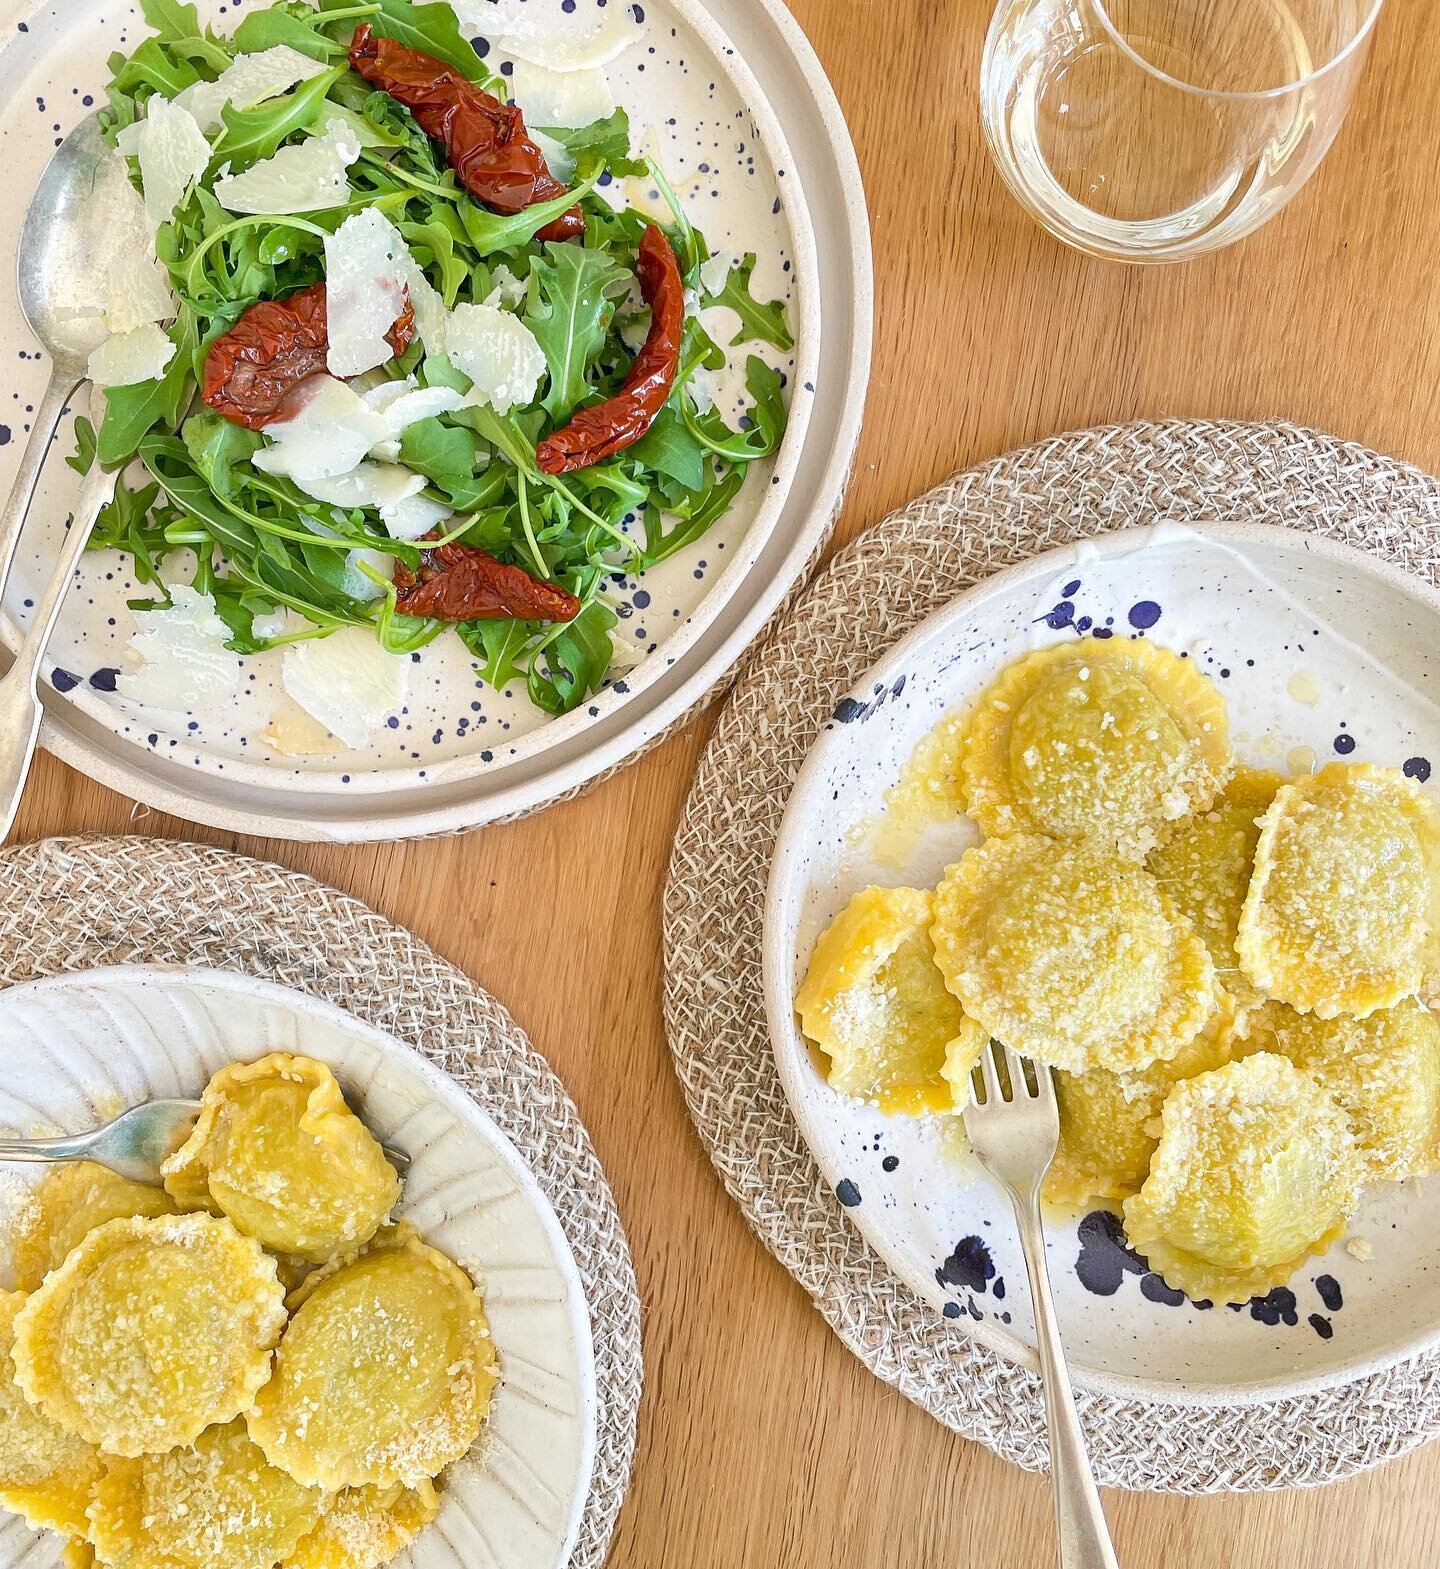 Its been a long time since I made ravioli, but thanks to @latuapasta sending me their new Artichoke and Parsley Sunflower Ravioli, I didn't have to make my own to enjoy this delicious lunch 😋 

This pretty ravioli is filled with seasonal artichokes,